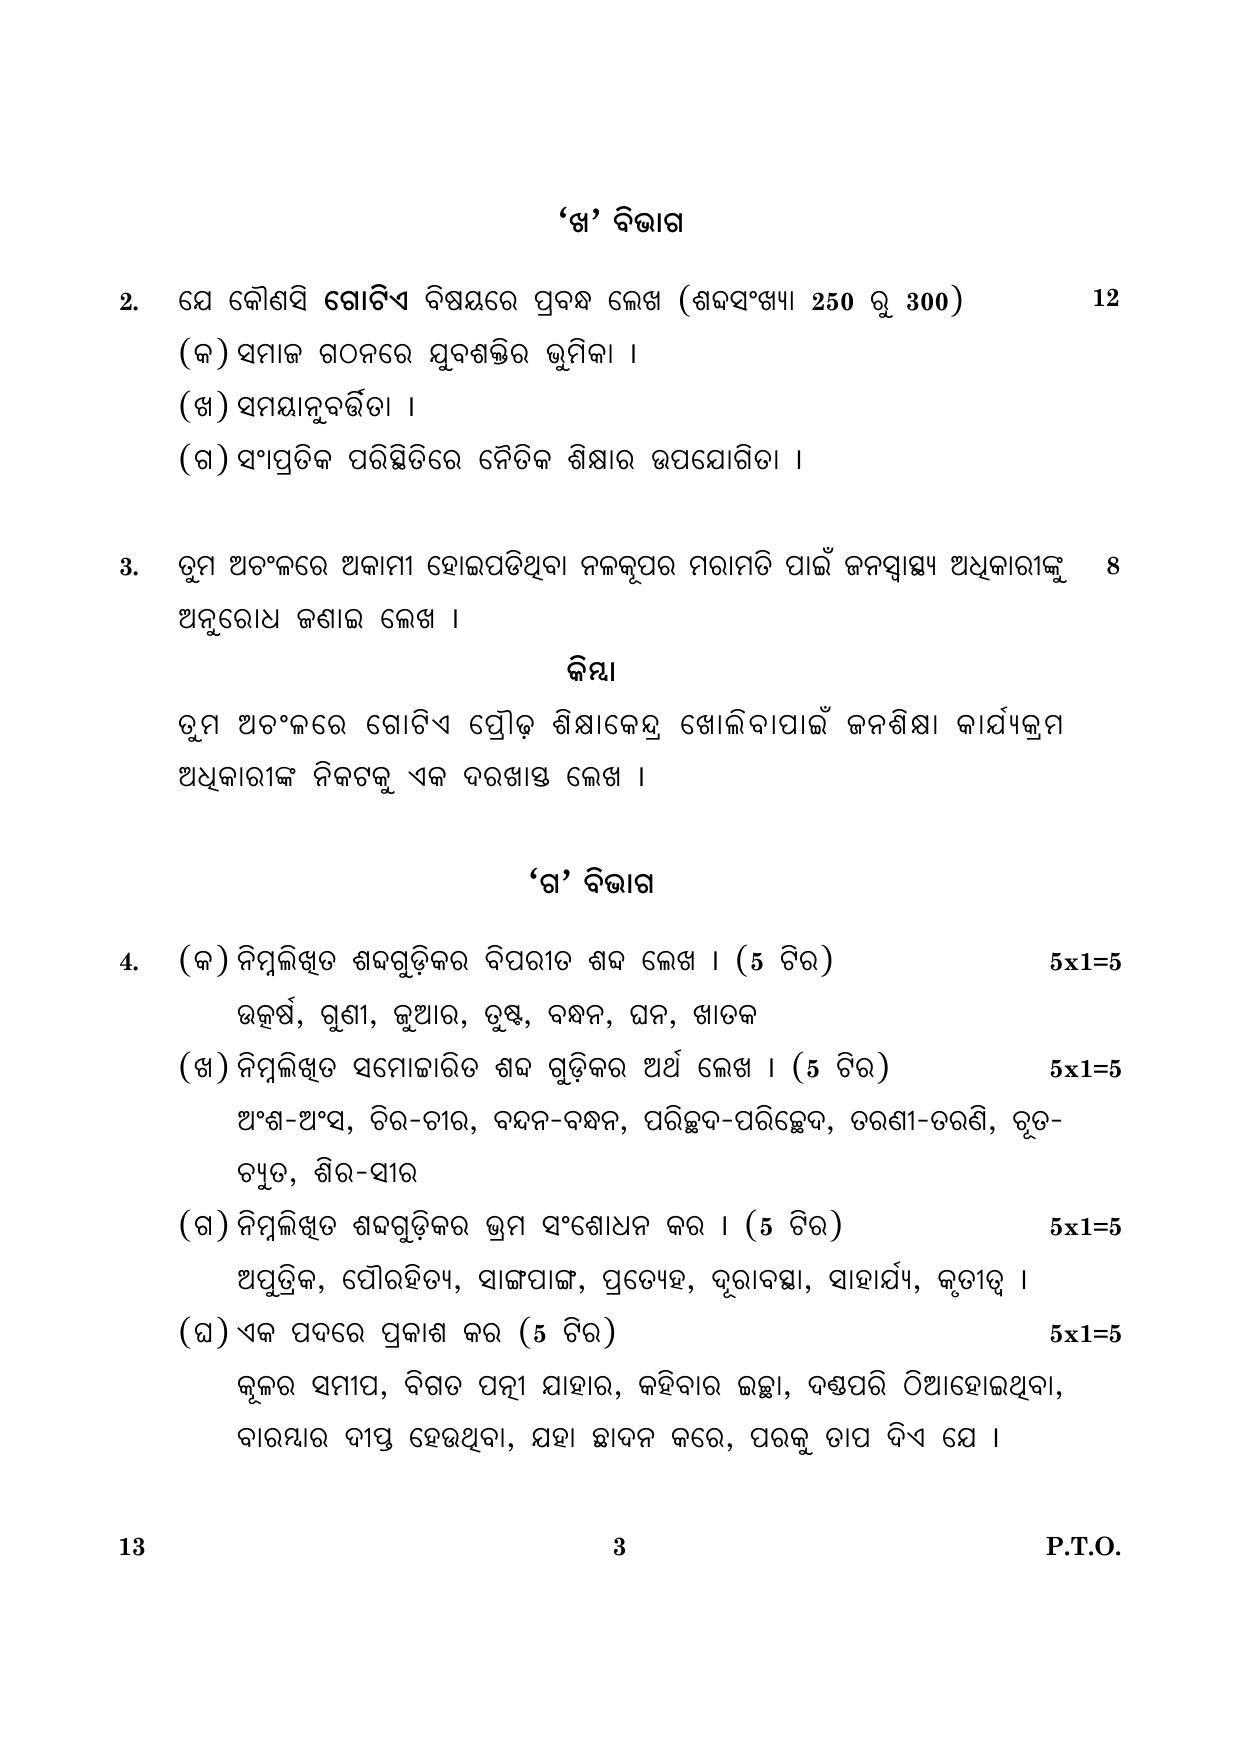 CBSE Class 12 013 Odia 2016 Question Paper - Page 3